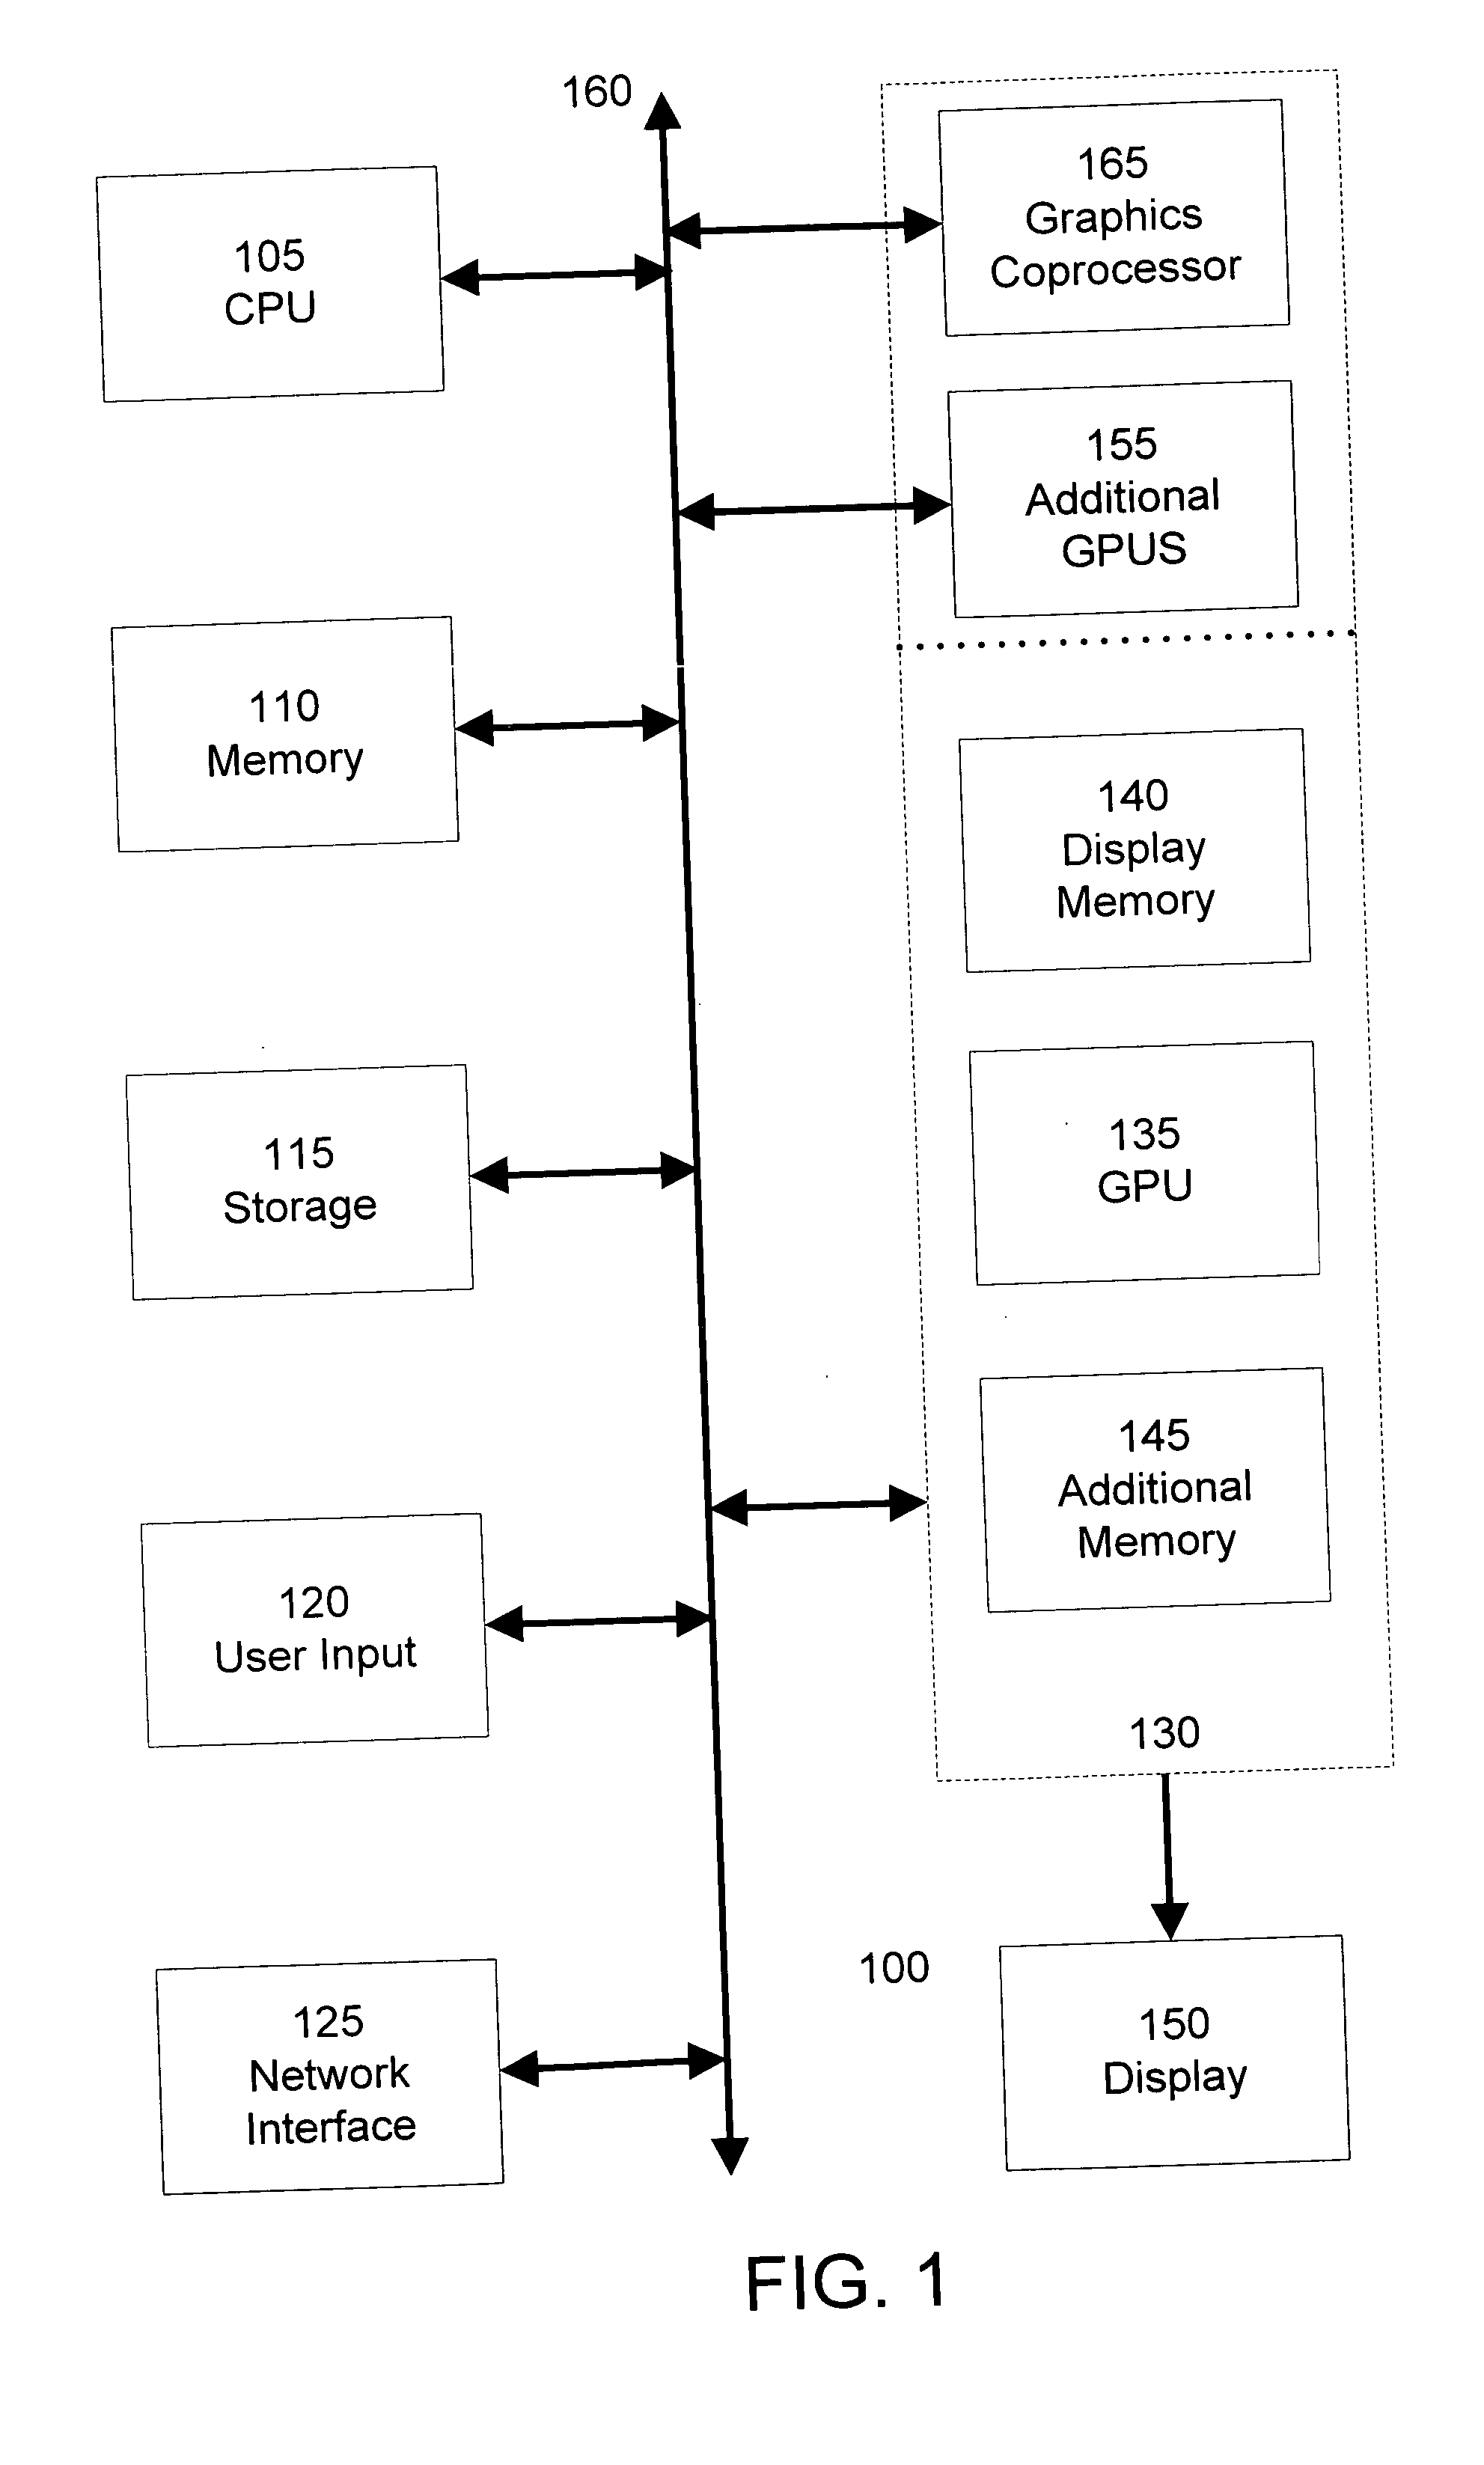 Point-to-point bus bridging without a bridge controller